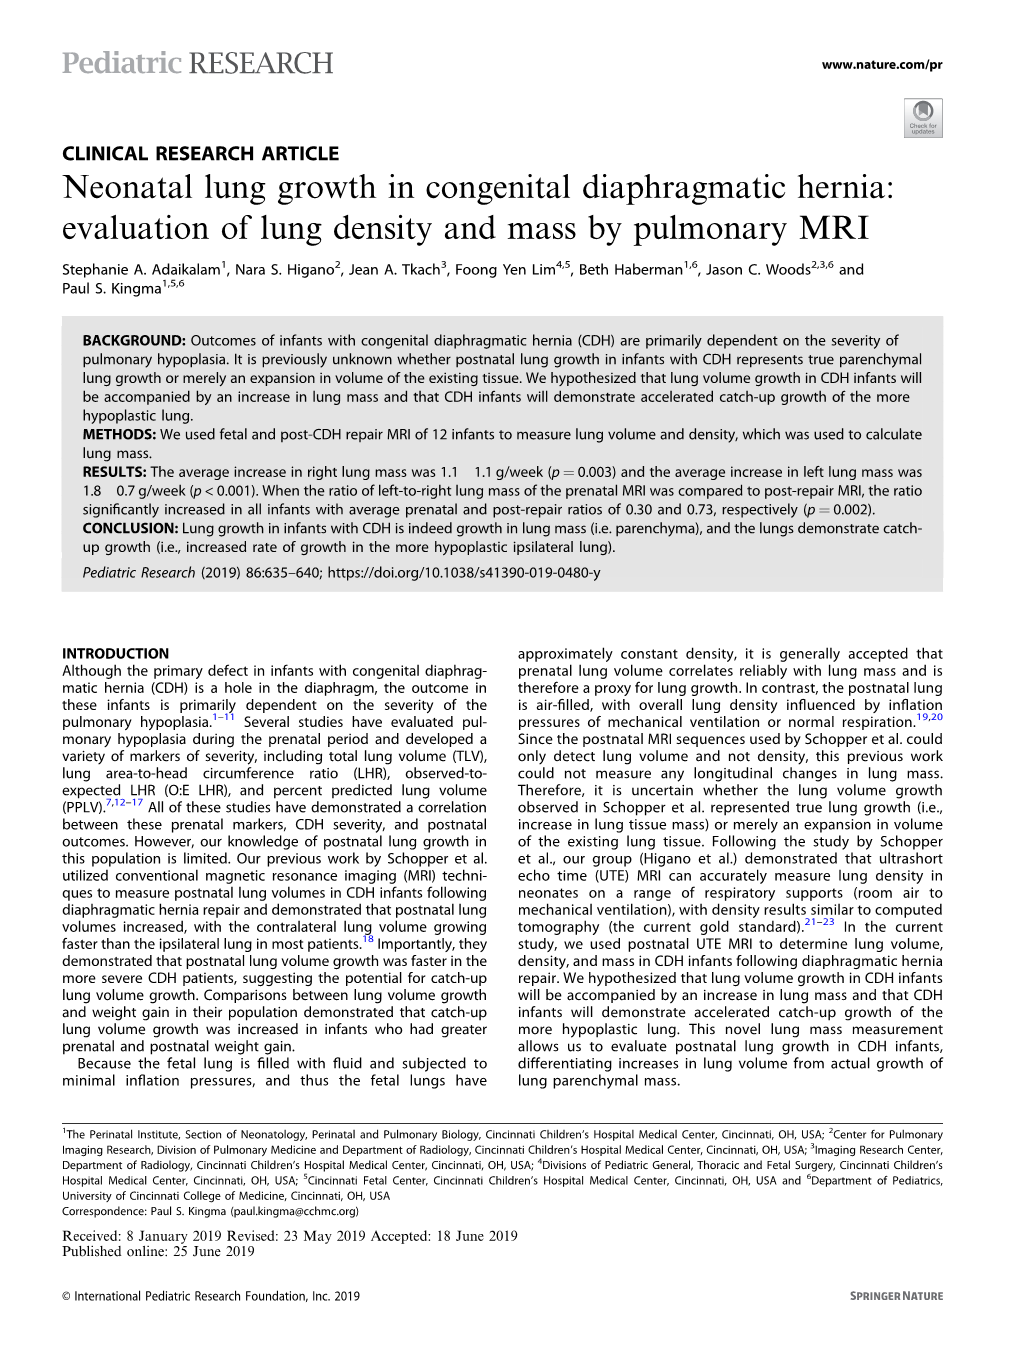 Neonatal Lung Growth in Congenital Diaphragmatic Hernia: Evaluation of Lung Density and Mass by Pulmonary MRI